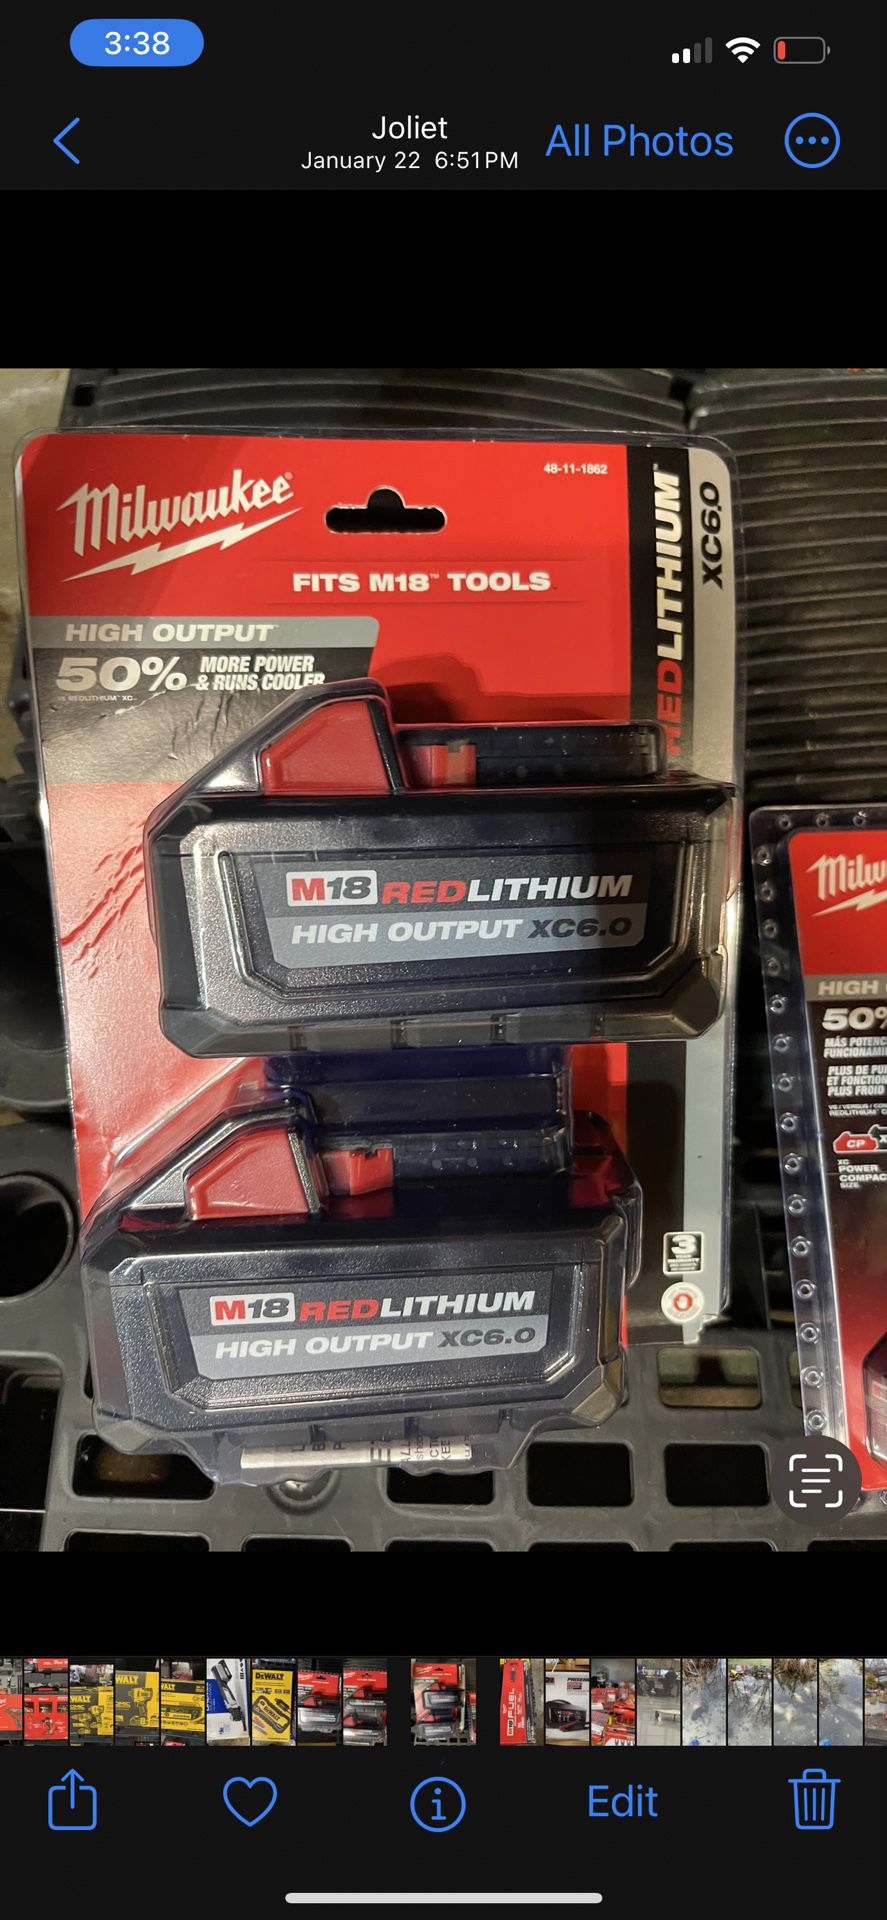 Milwaukee M18 Red Lithium High Output XC 6.0 X 2 New In Box Never Opened.